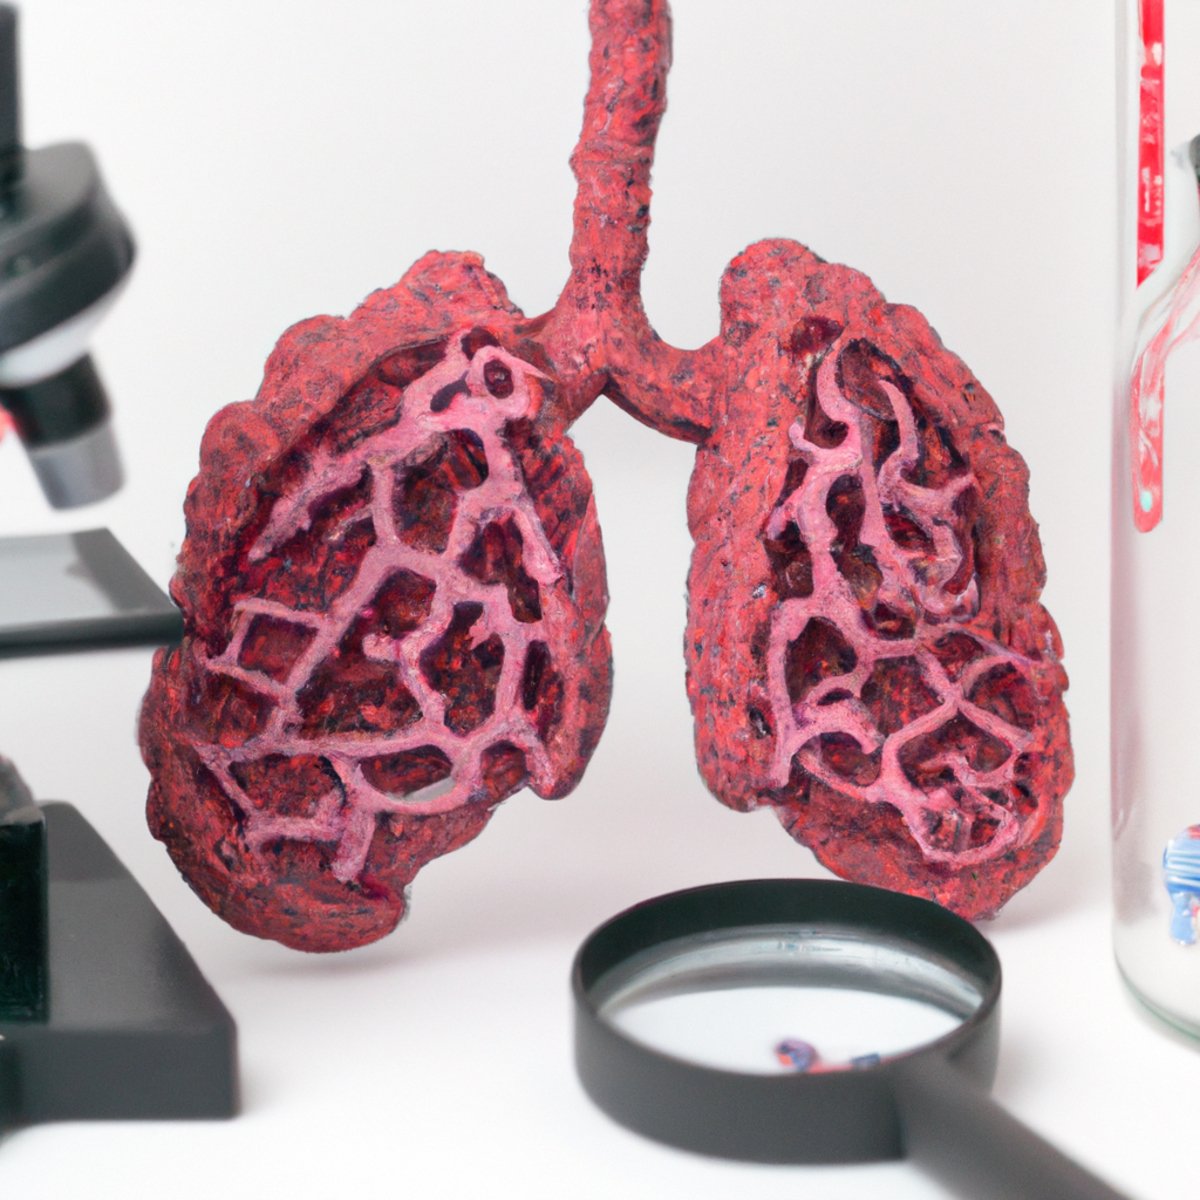 Detailed lung model with stethoscope, magnifying glass, and medical reports - Pleuropulmonary Blastoma